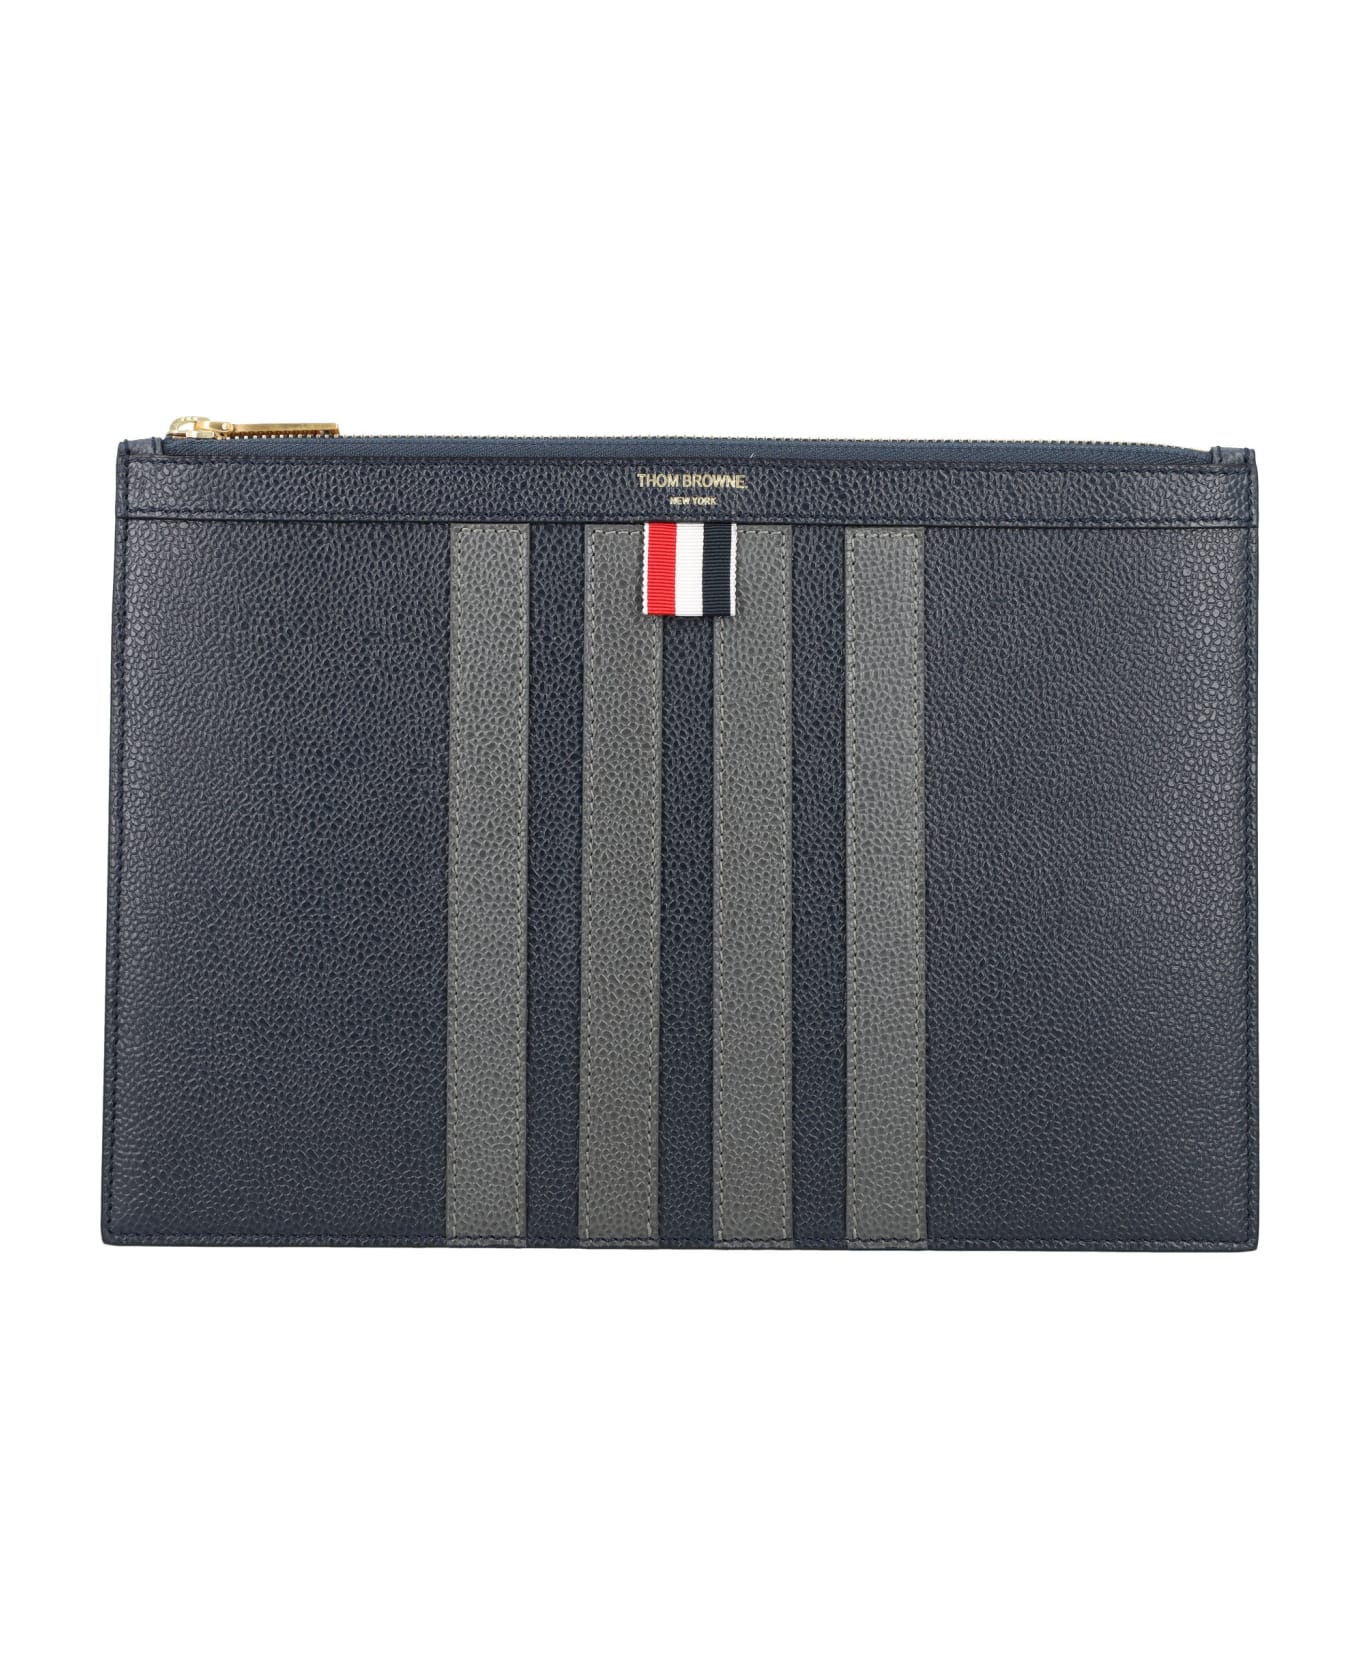 Thom Browne Pebble Grain Leather 4 Bar Small Document Holder - Blue